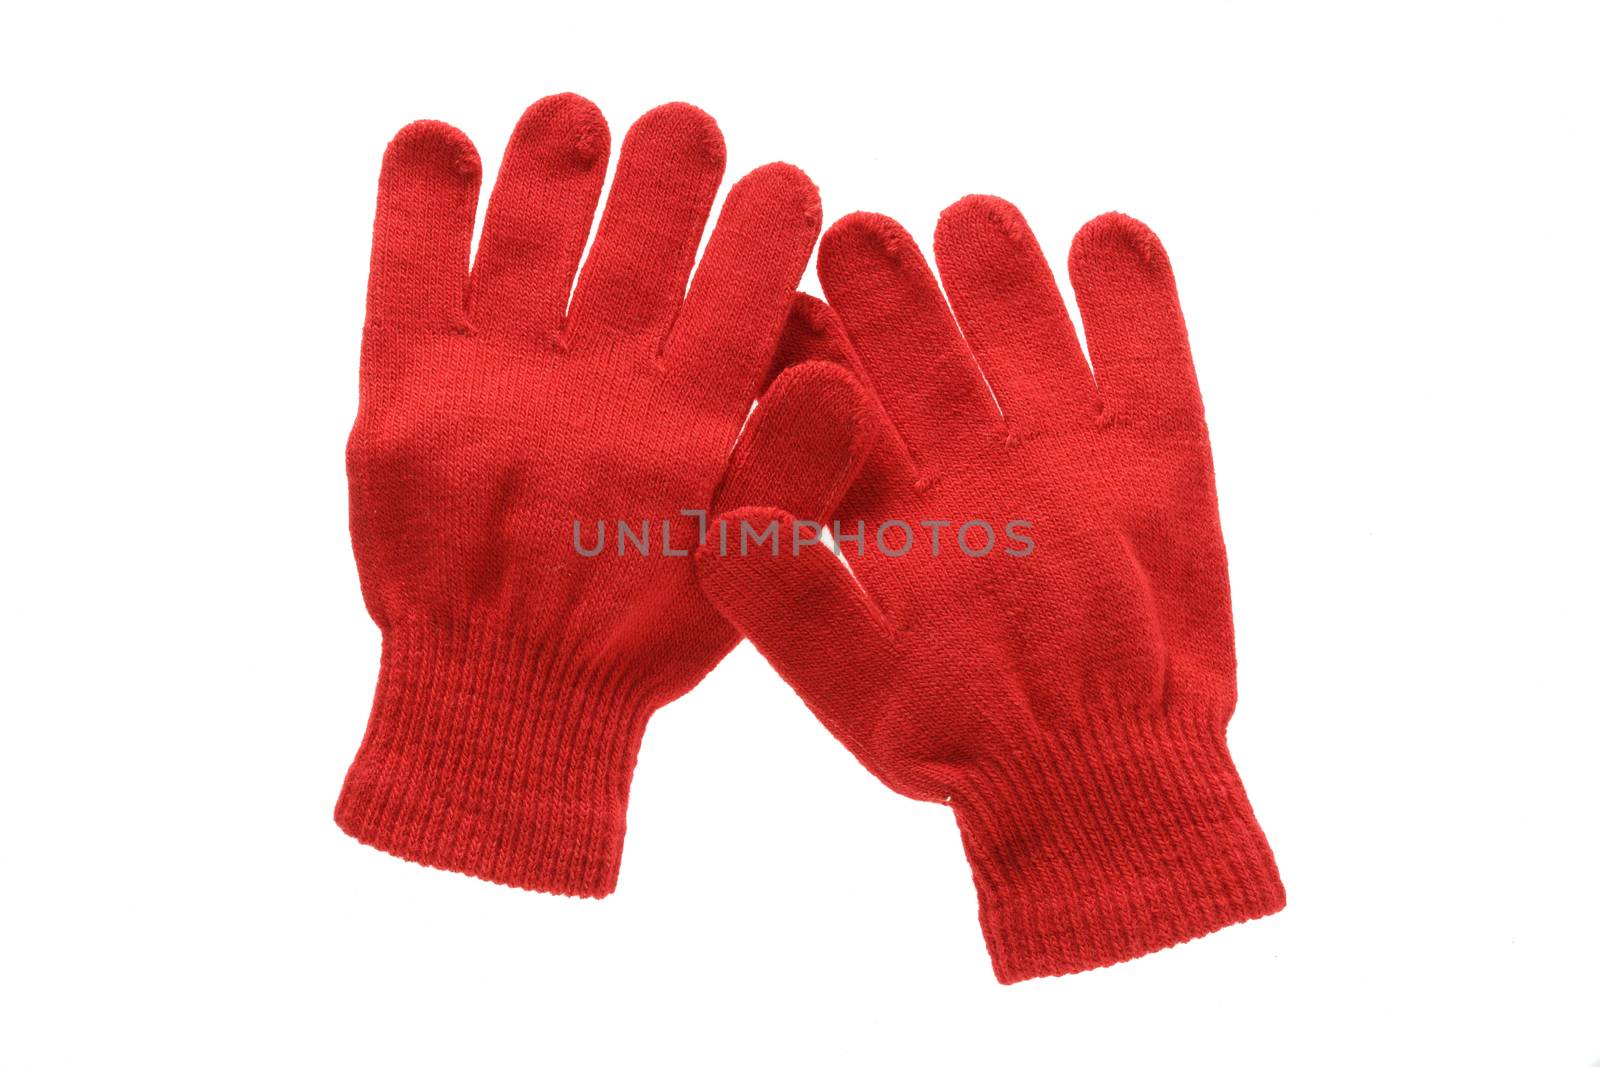 Red knitted cloth kid gloves with pattern  isolated on white background.